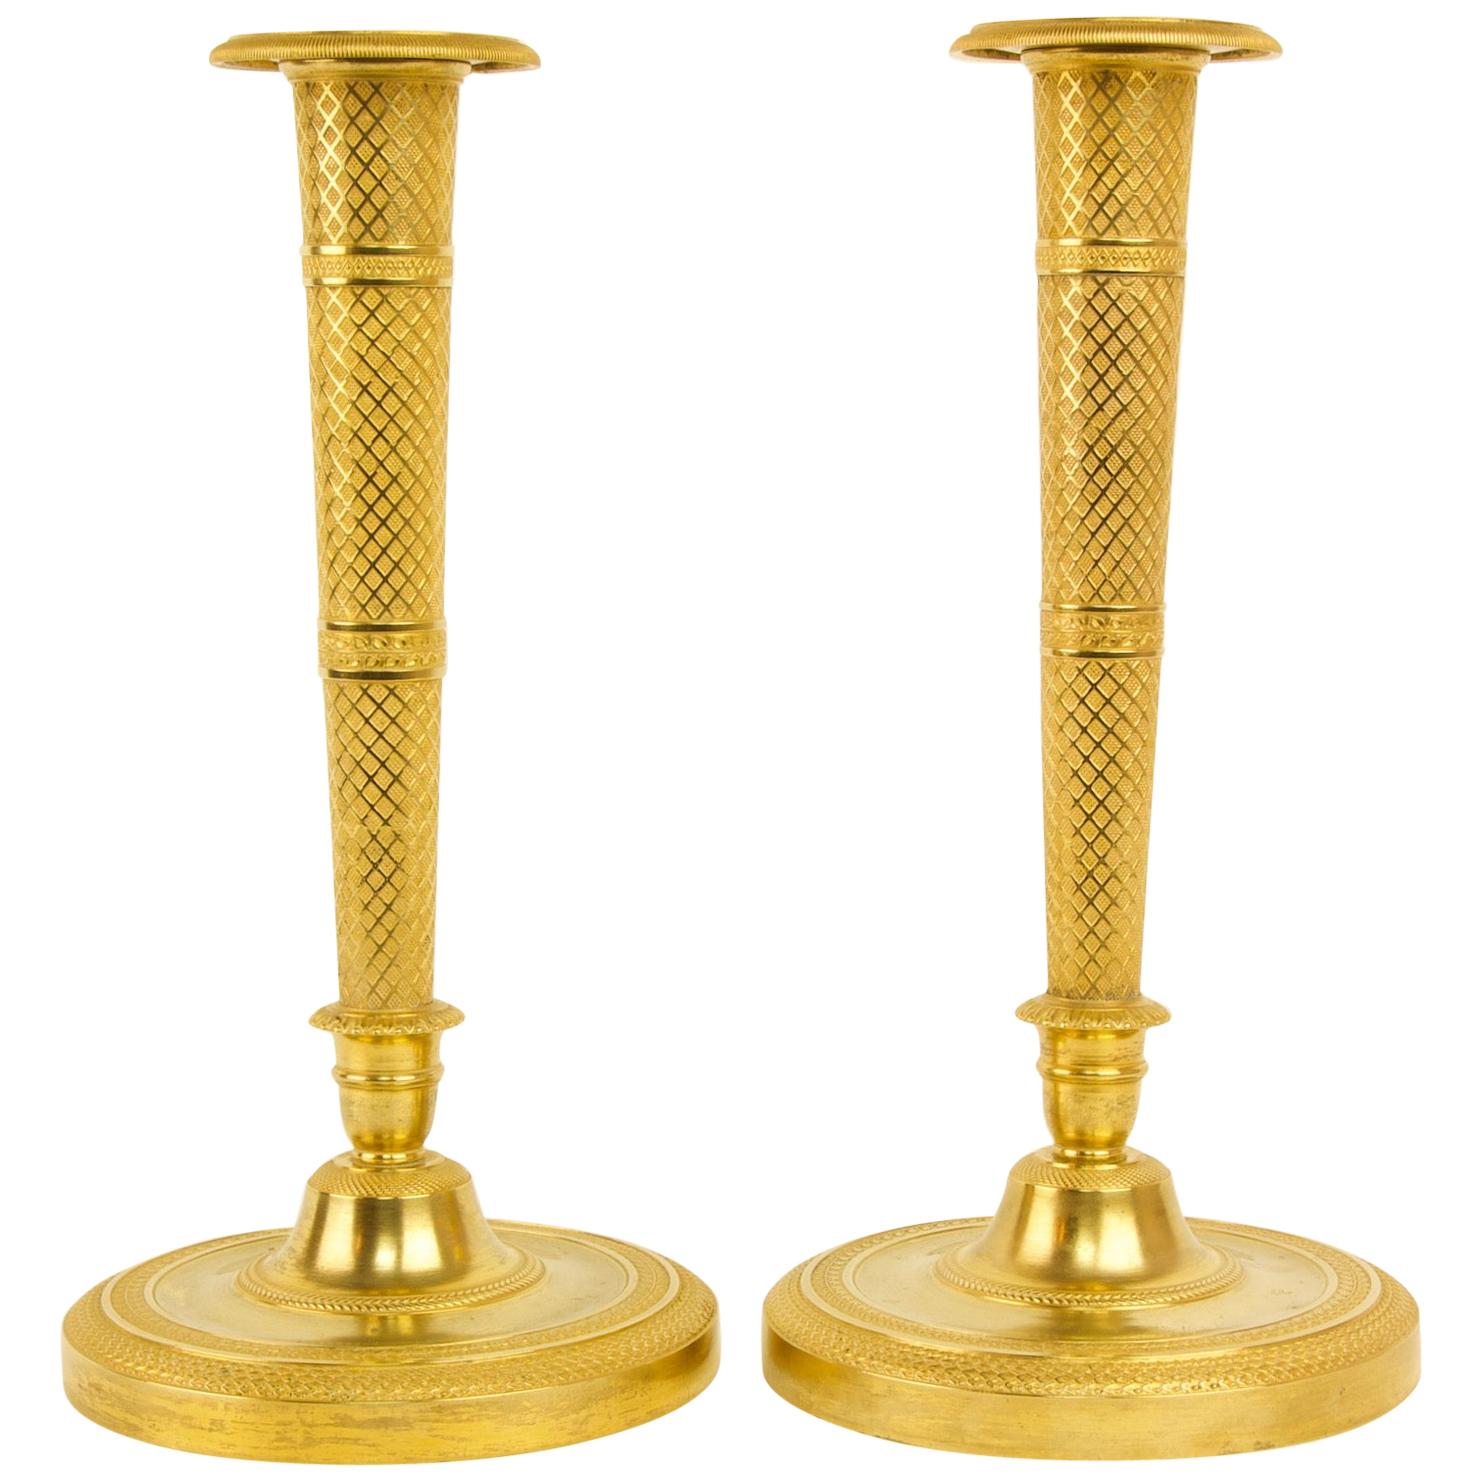 Pair of Early 19th Century French Empire Gilt Bronze Candlesticks after C. Galle For Sale